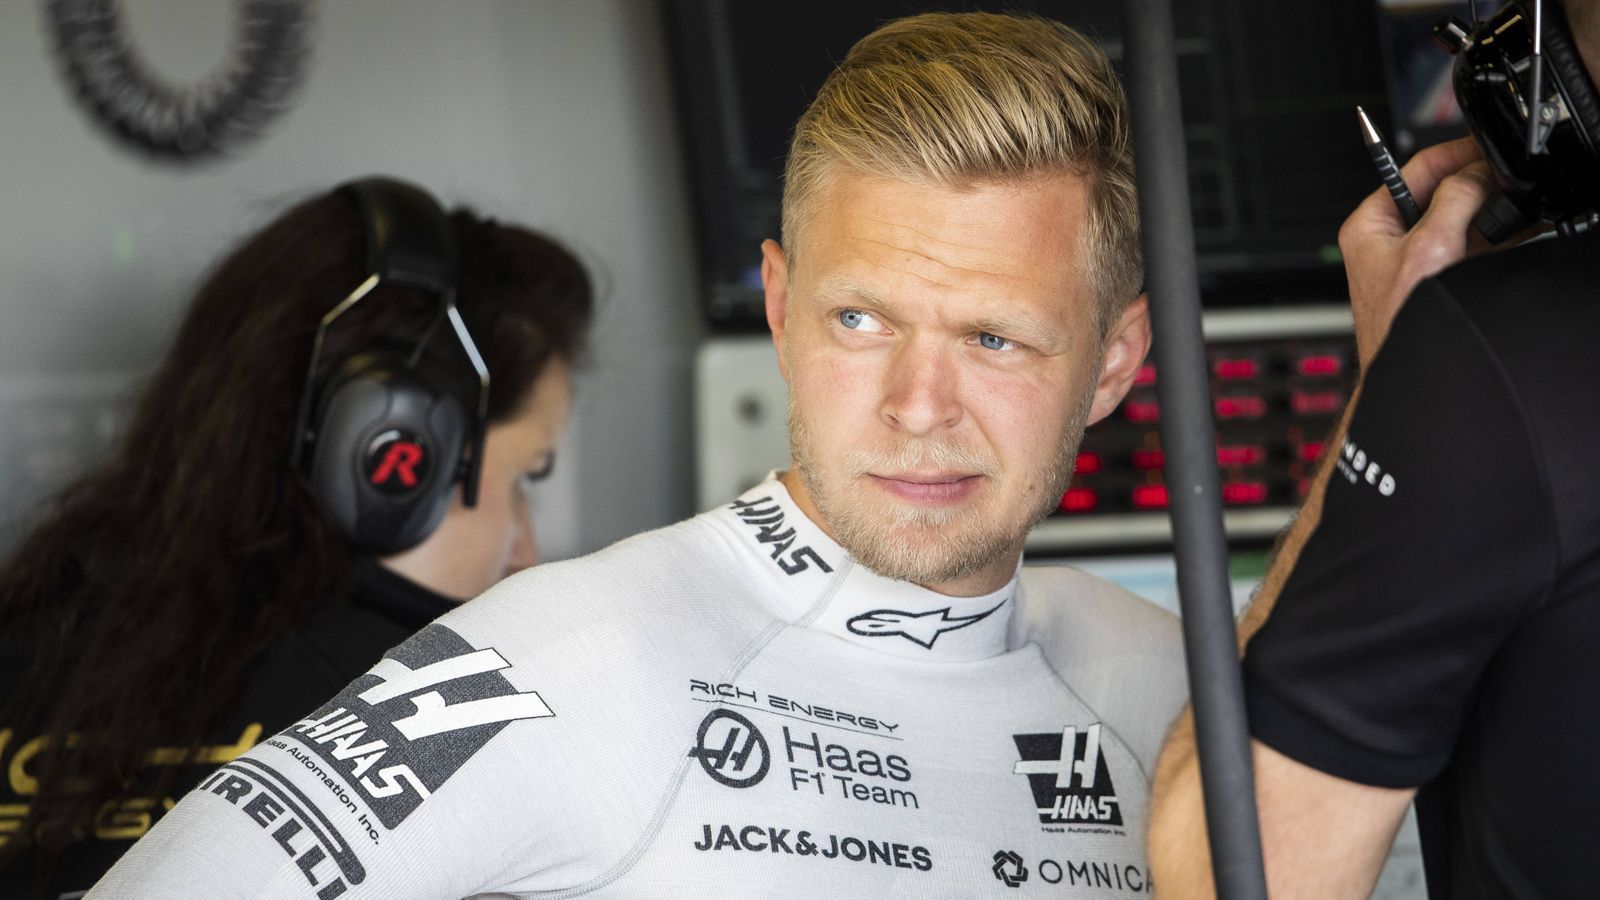 
                <strong>4. Kevin Magnussen</strong><br>
                Punkte insgesamt: 19Aktuelle Punkte: 3Punkte 2014: 4Punkte 2015: /Punkte 2016: 4Punkte 2017: 6Punkte 2018: 2Punkte 2019: 3
              